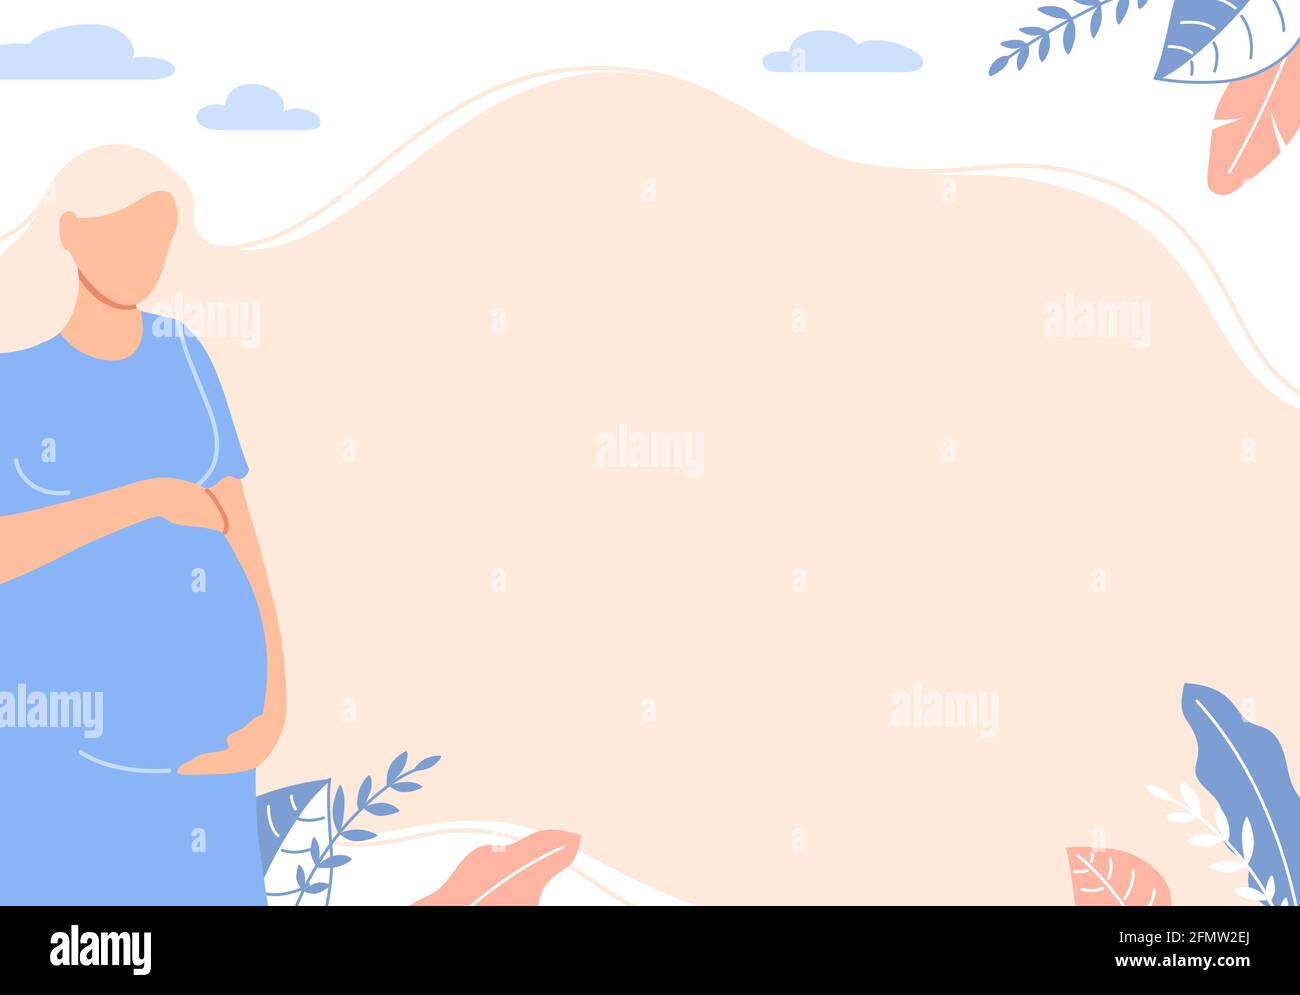 Pregnant woman expecting a baby background. Stock Vector